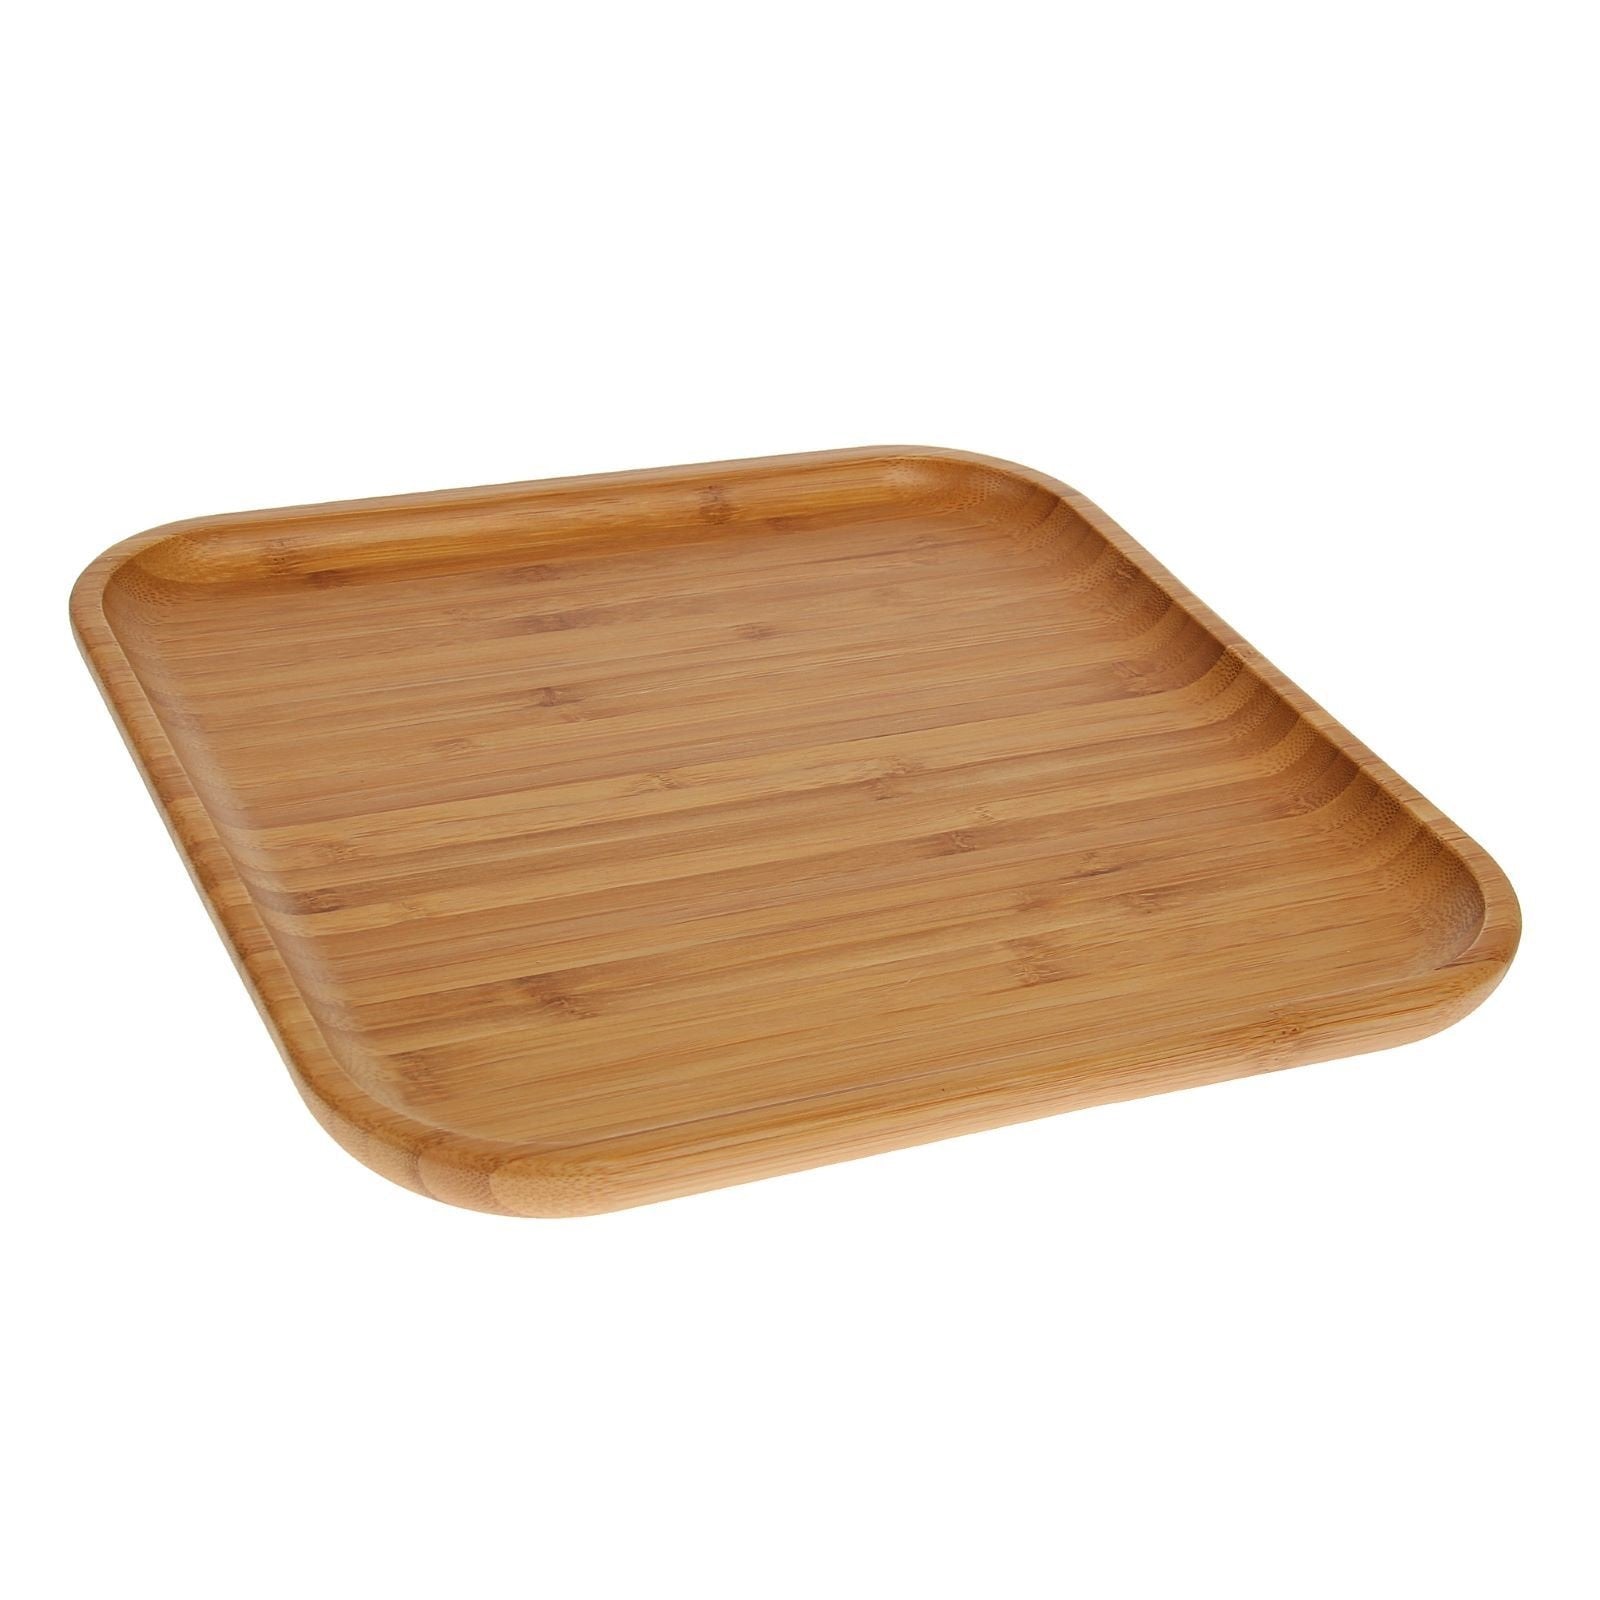 Bamboo Square Plate 11" inch X 11" inch -3